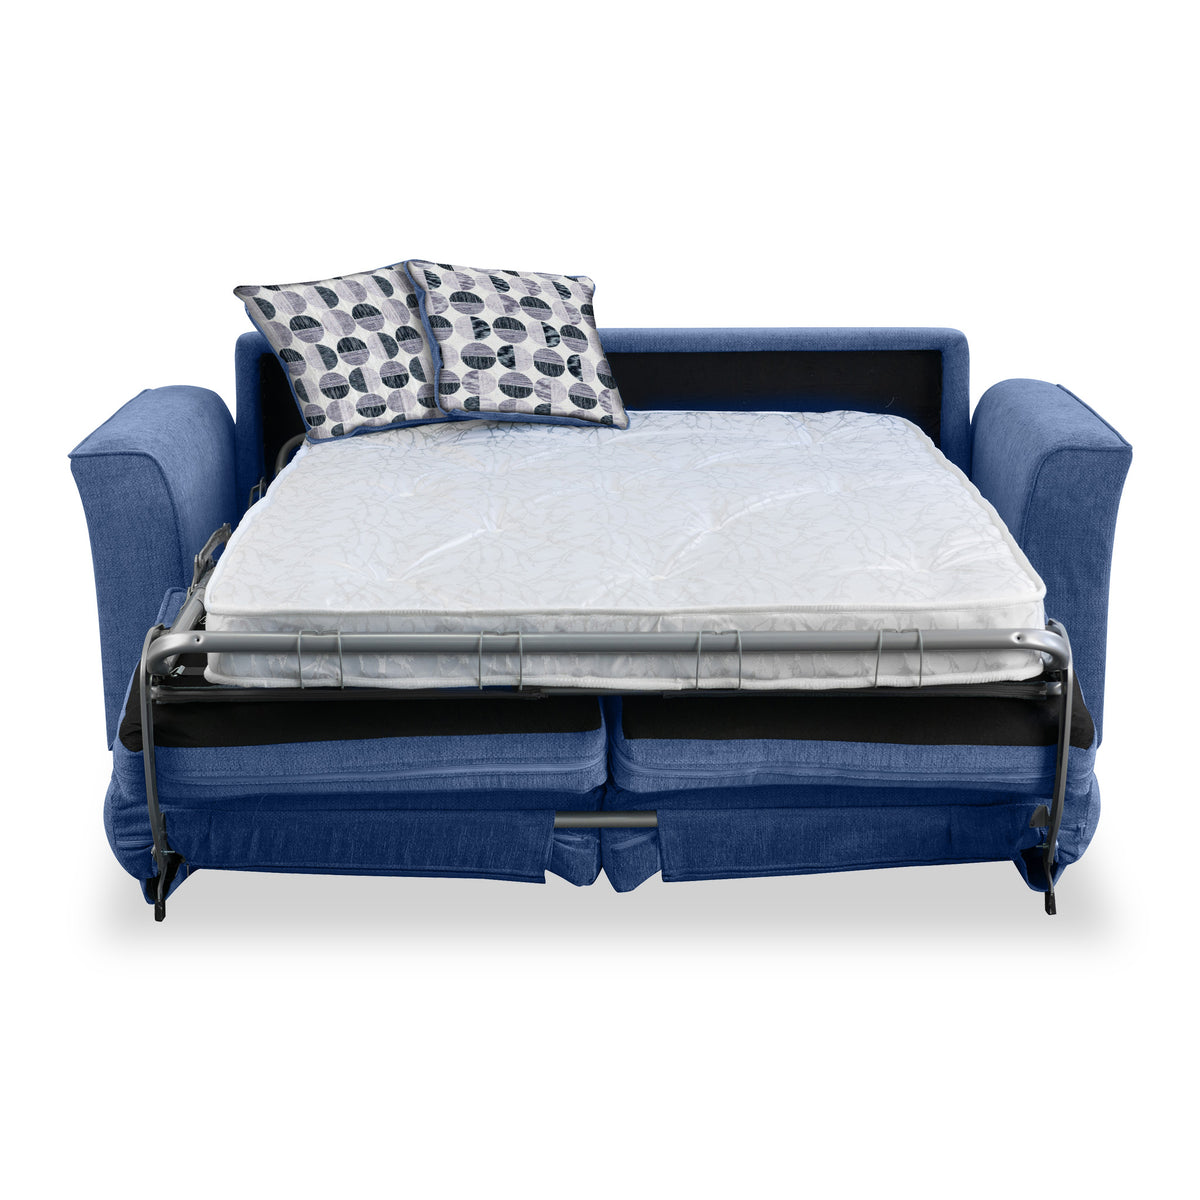 Abbott 2 Seater Sofabed in Denim with Rufus Mono Cushions by Roseland Furniture